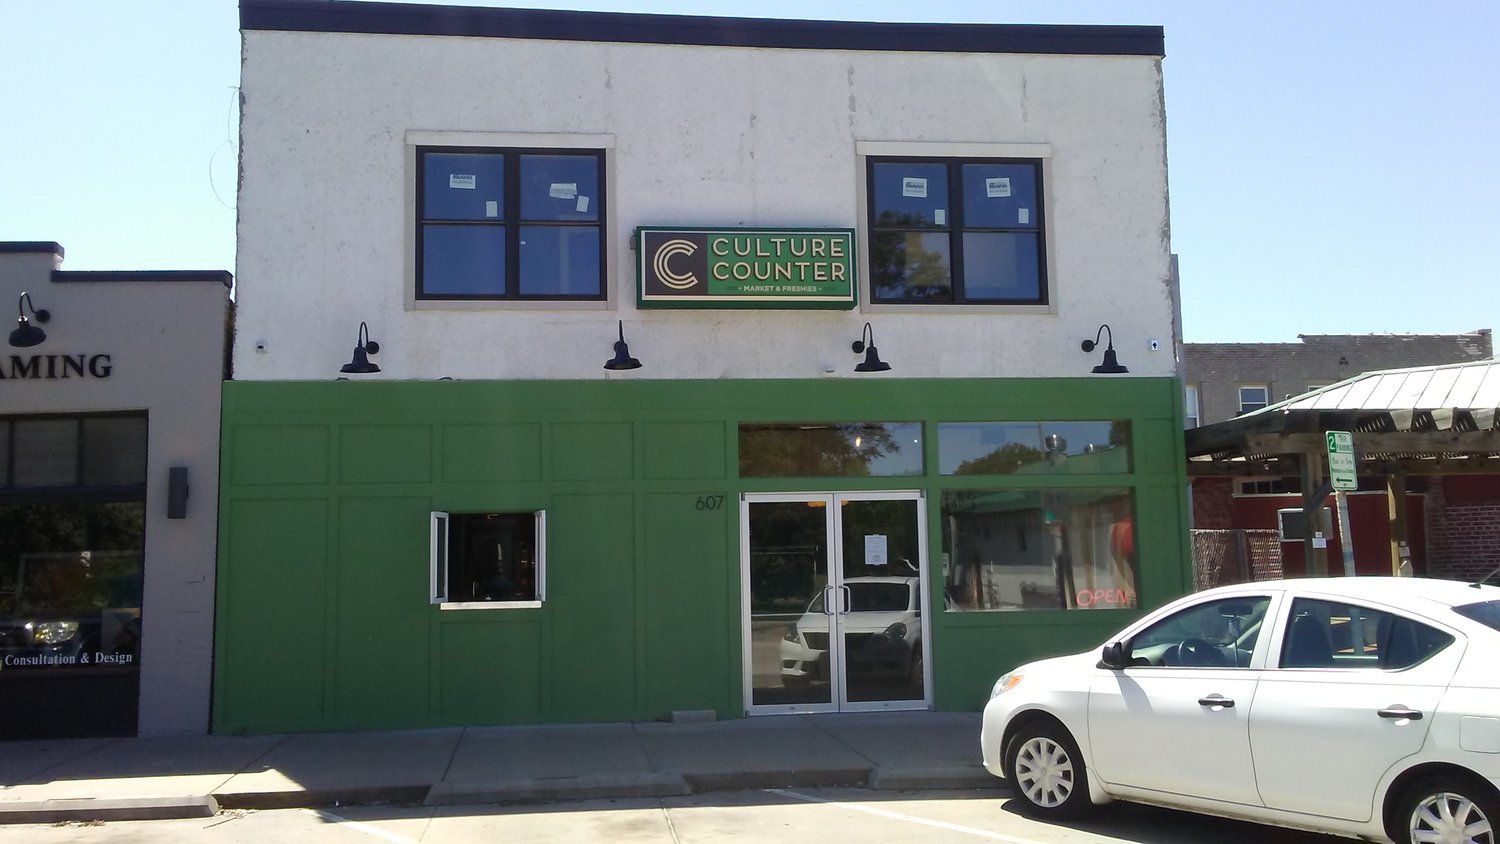 Culture Counter is open in the Rountree neighborhood at 607 E. Pickwick Ave.